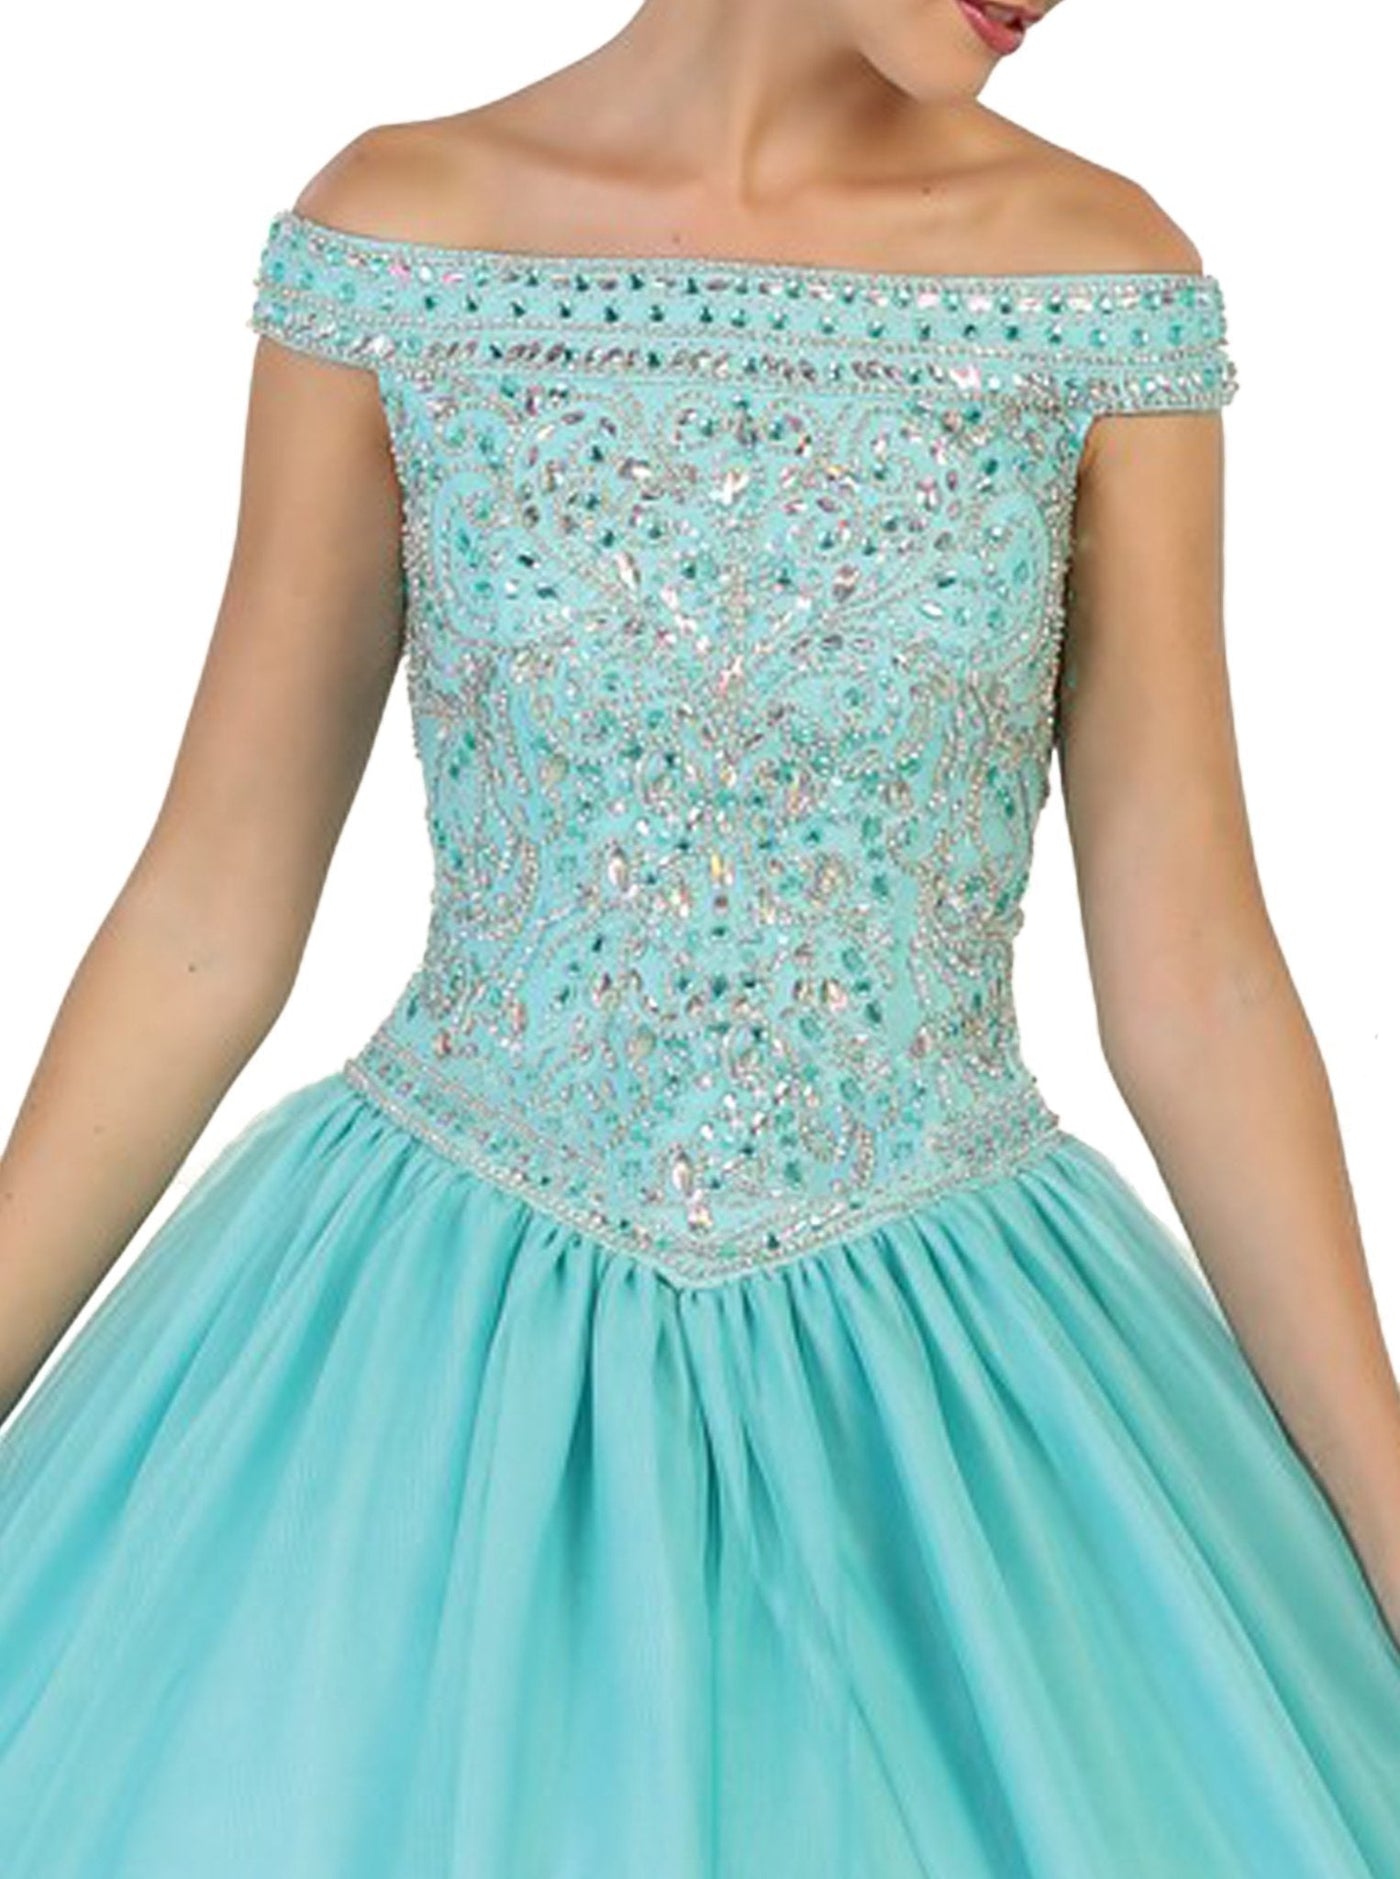 May Queen - LK91 Embellished Off-Shoulder Quinceañera Ballgown Special Occasion Dress